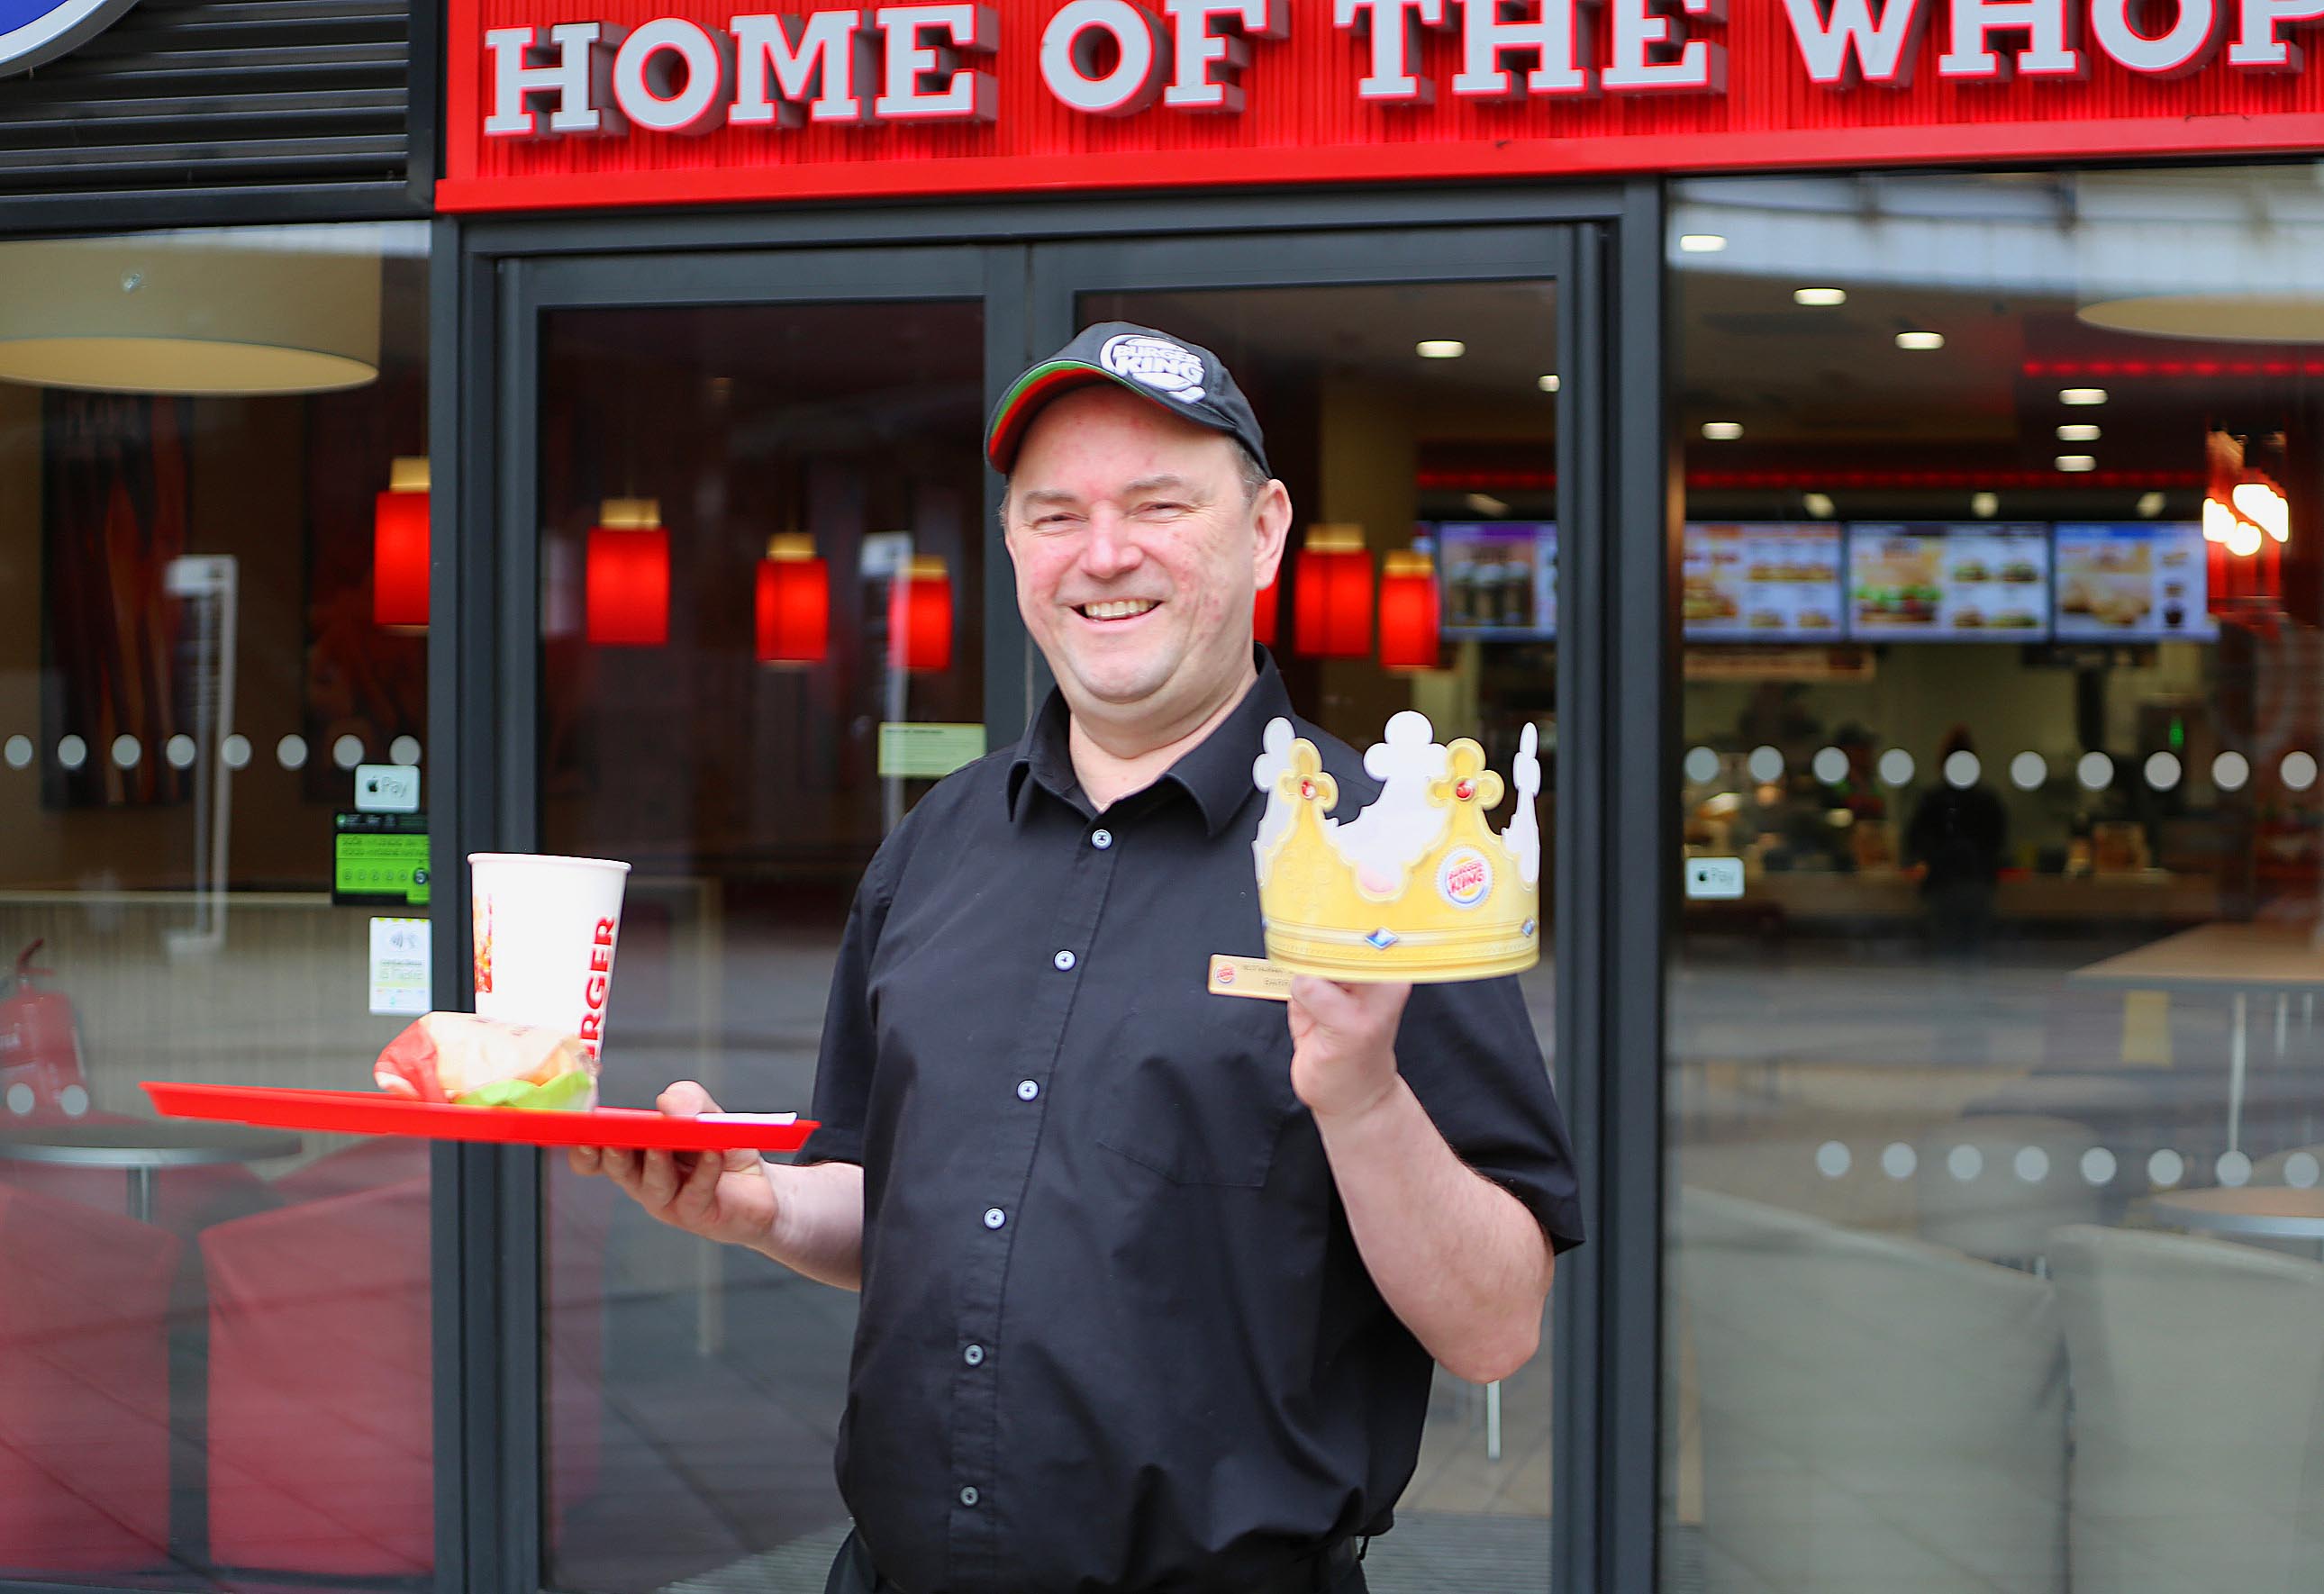 New boss Barry serves up burgers instead of beer